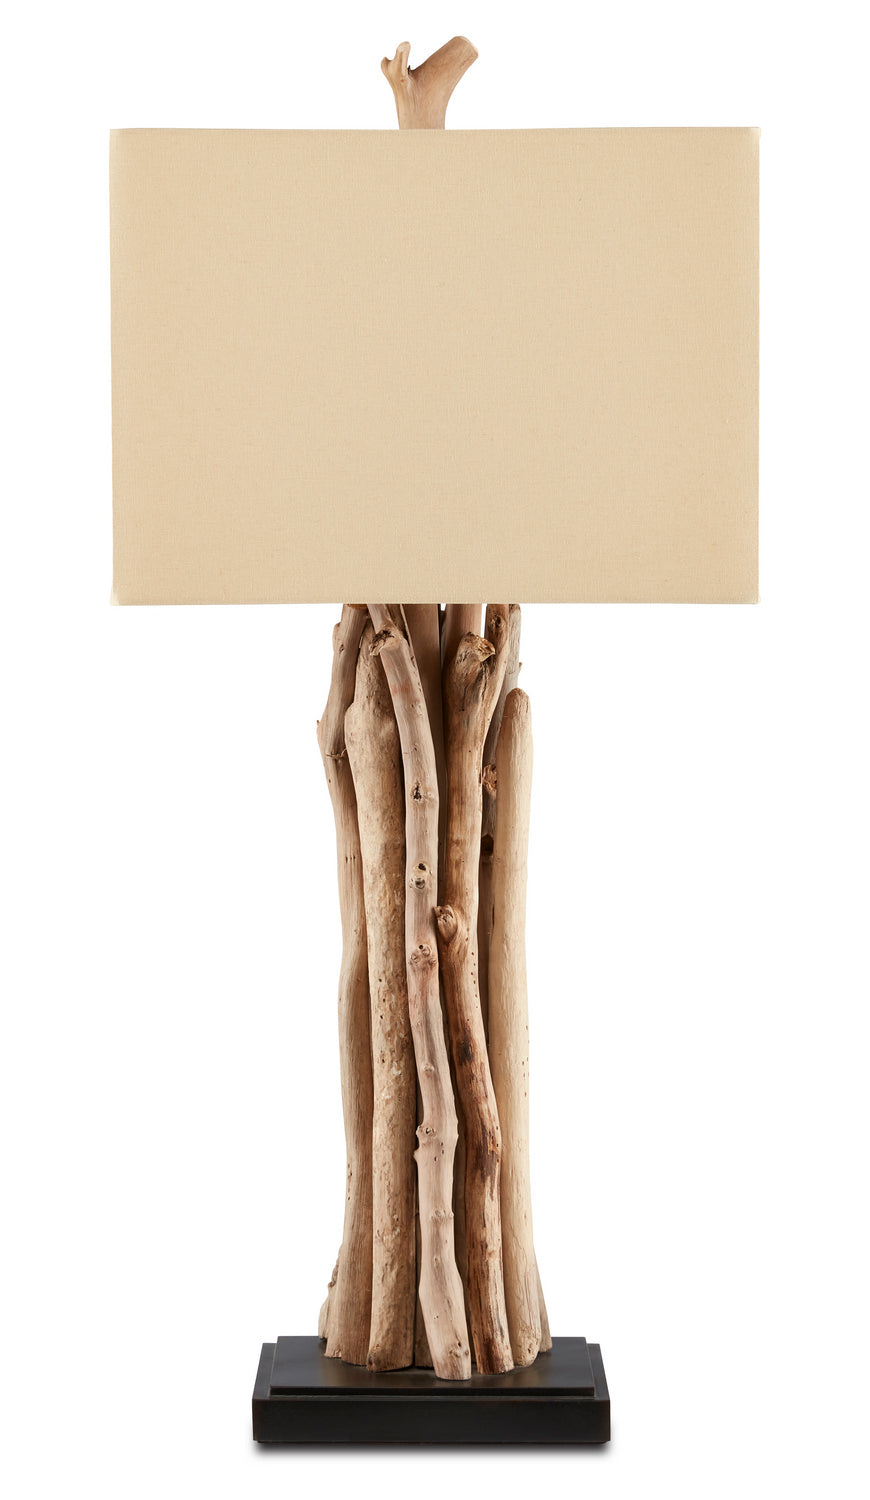 One Light Table Lamp from the Driftwood collection in Natural/Old Iron finish